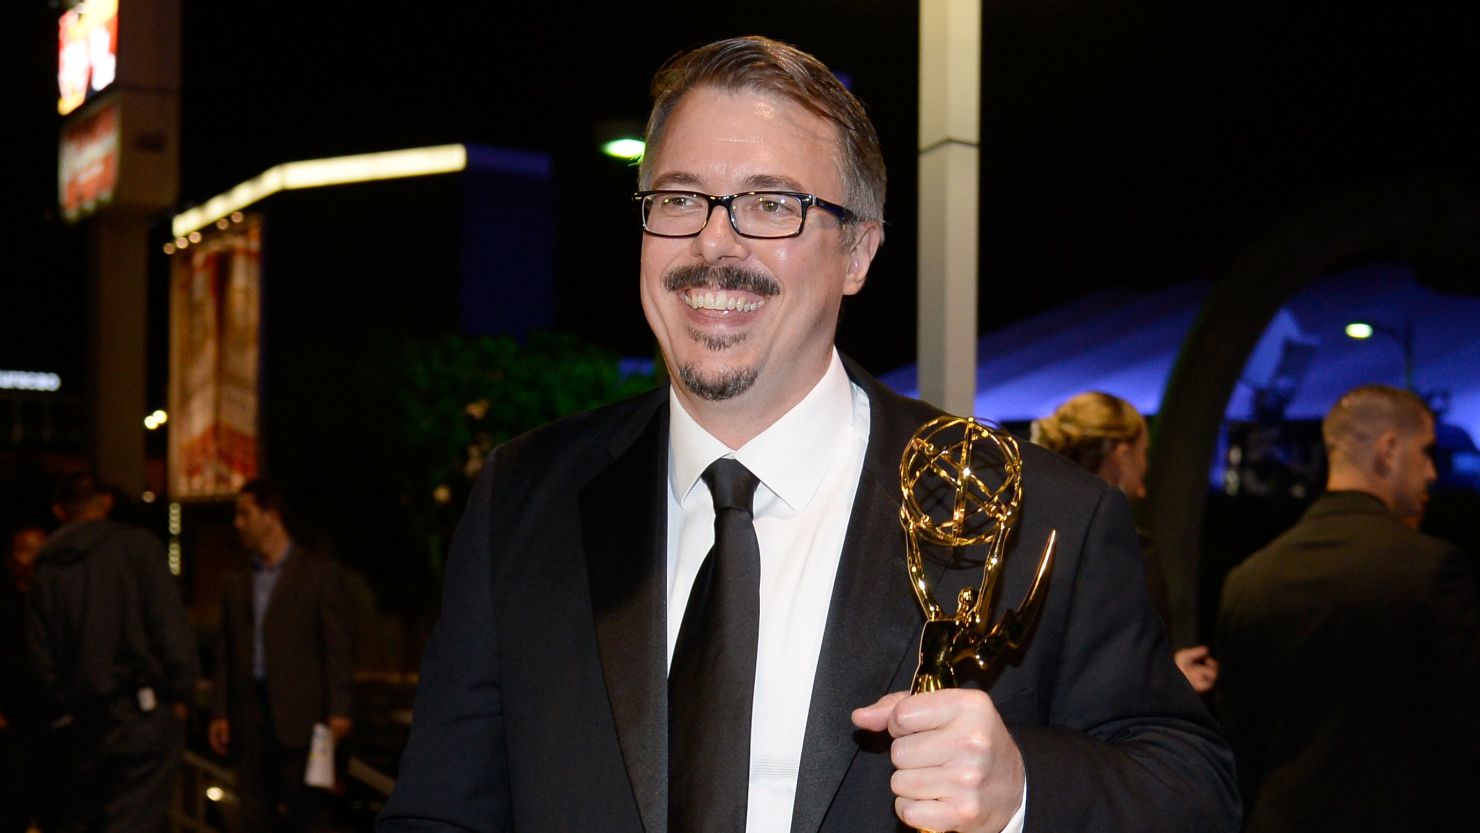 "Breaking Bad" creator shows off his Emmy from the 2013 Emmy Awards.